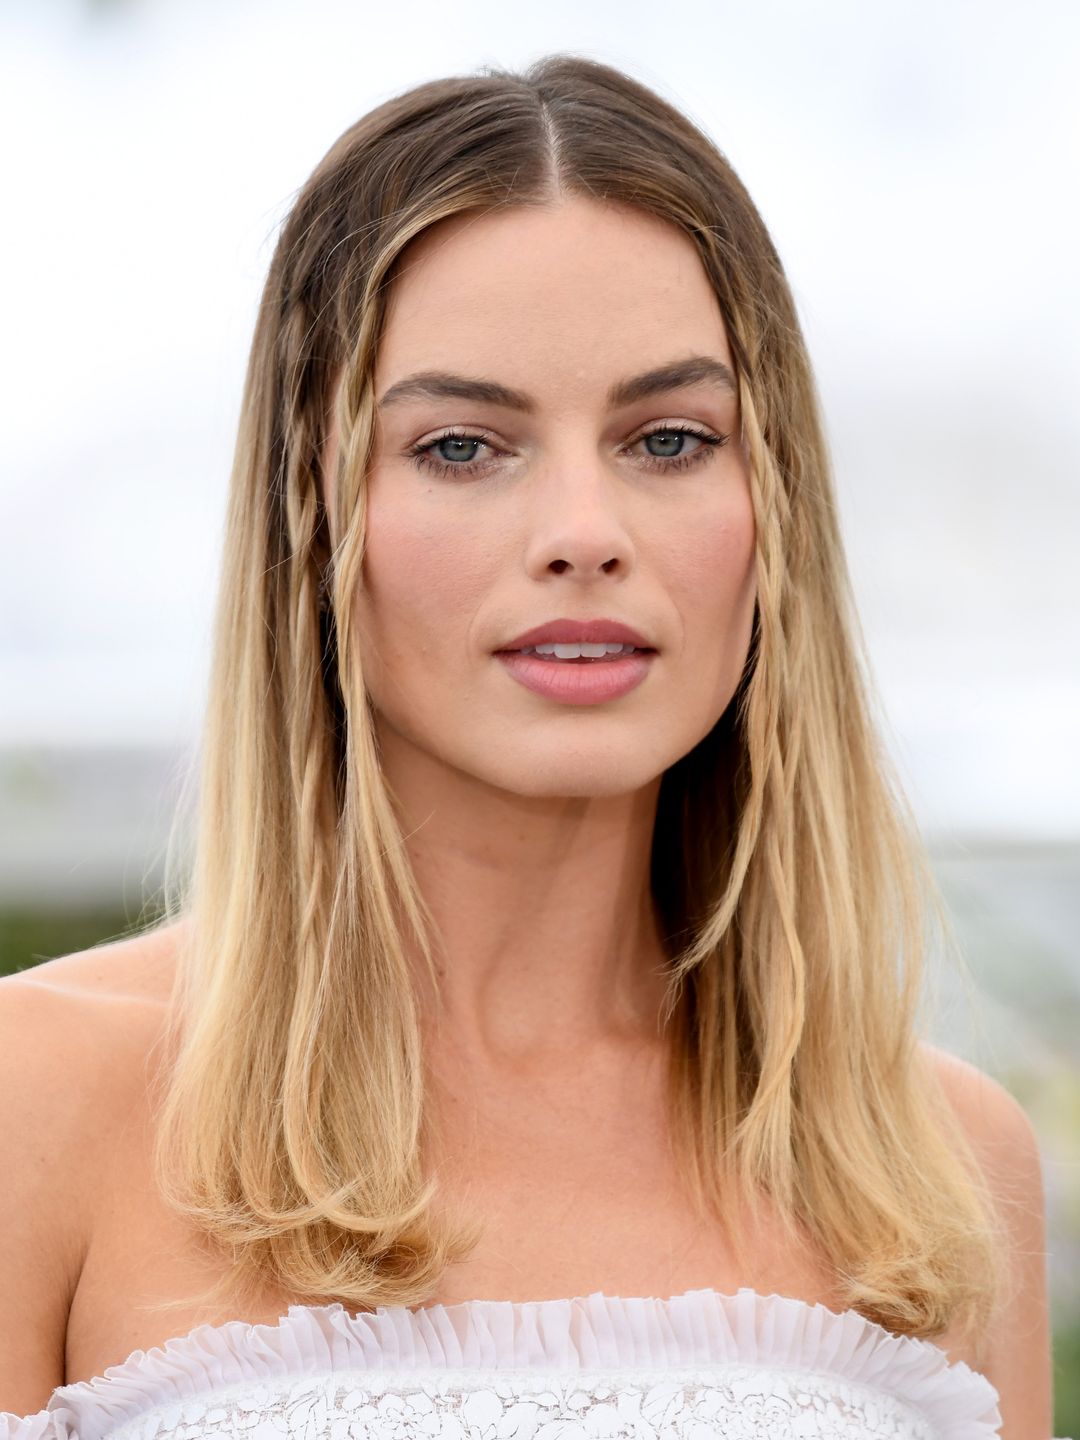 Margot Robbie with baby braids and understated makeup